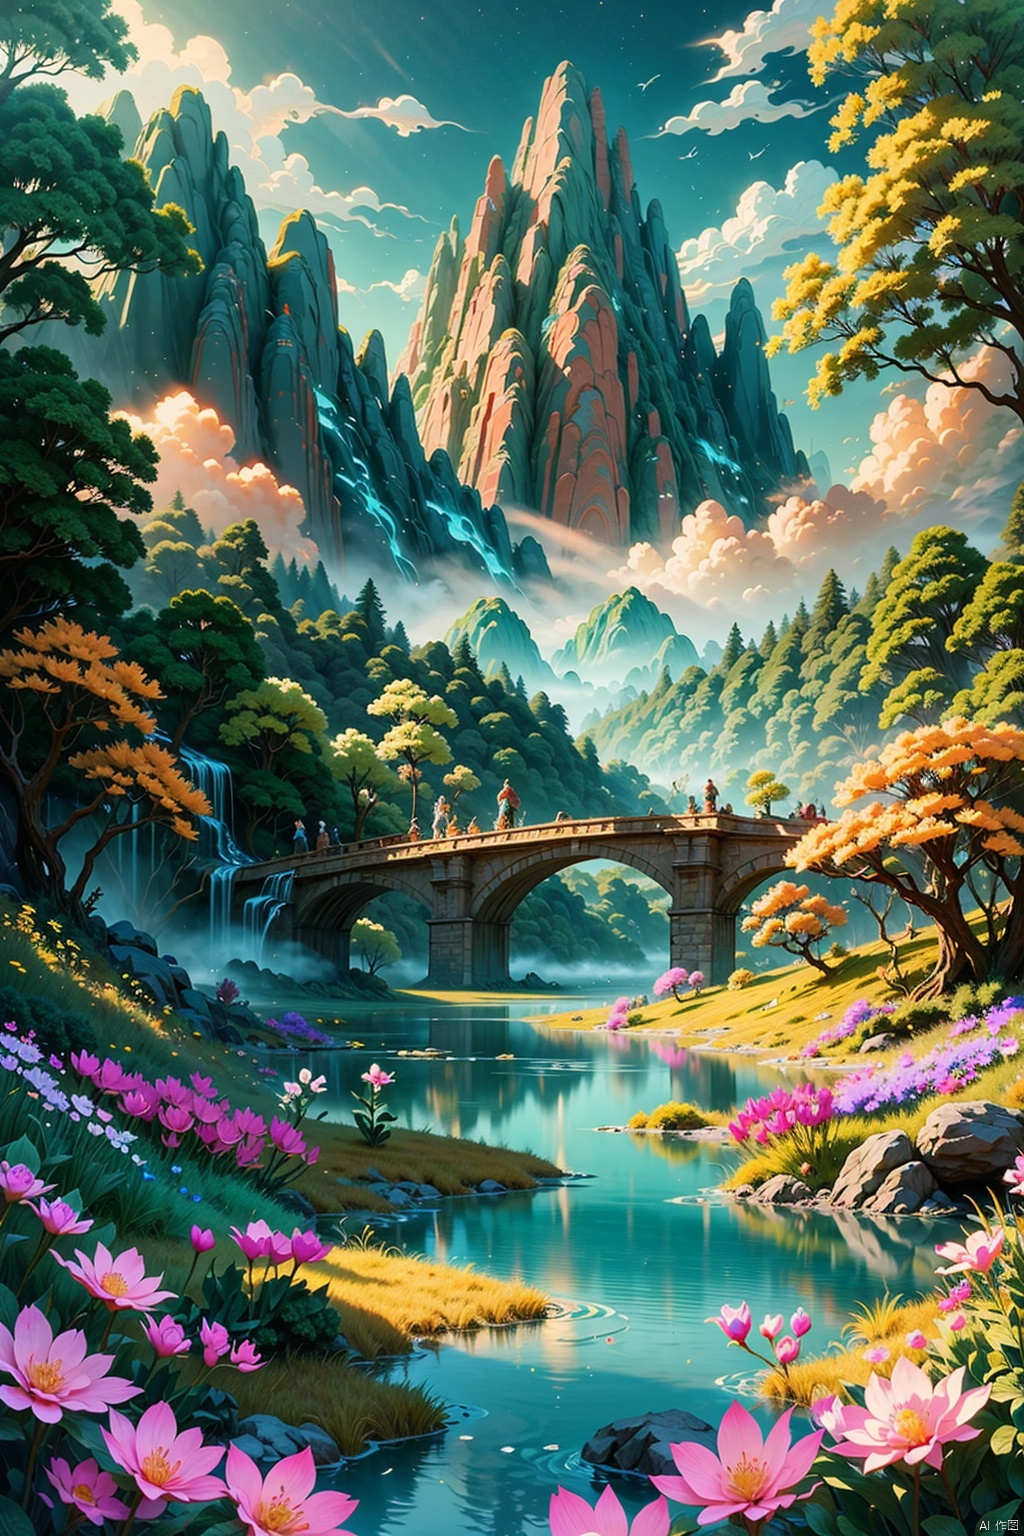  Clouds, green dragons, forests, lakes, flowers, beauty, best quality, masterpieces, ultra HD, super details, epic light and shadow, aesthetic, visual feast